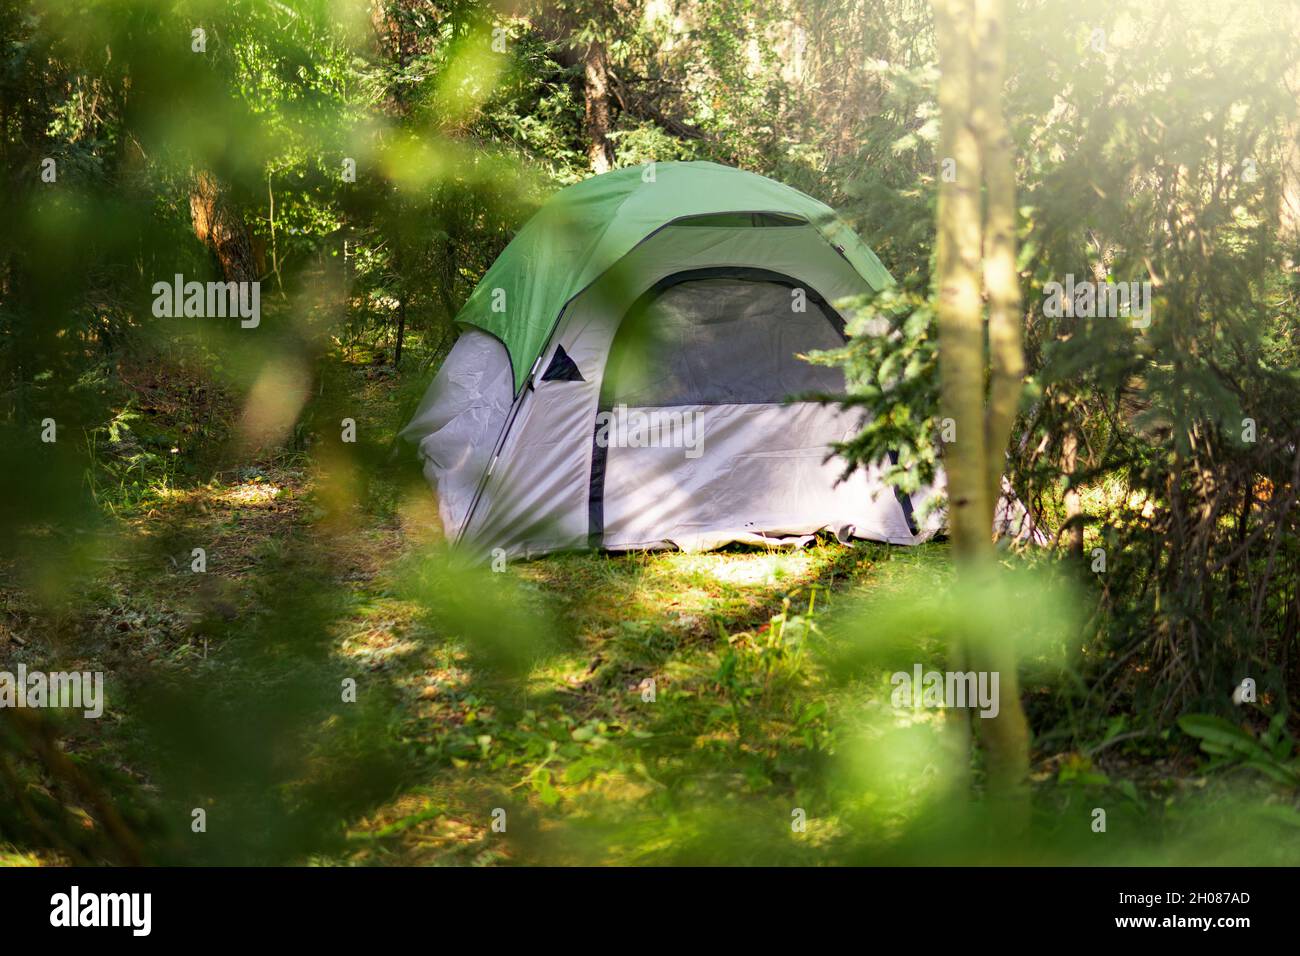 Tent Surrounded By Trees In Green Forest Stock Photo